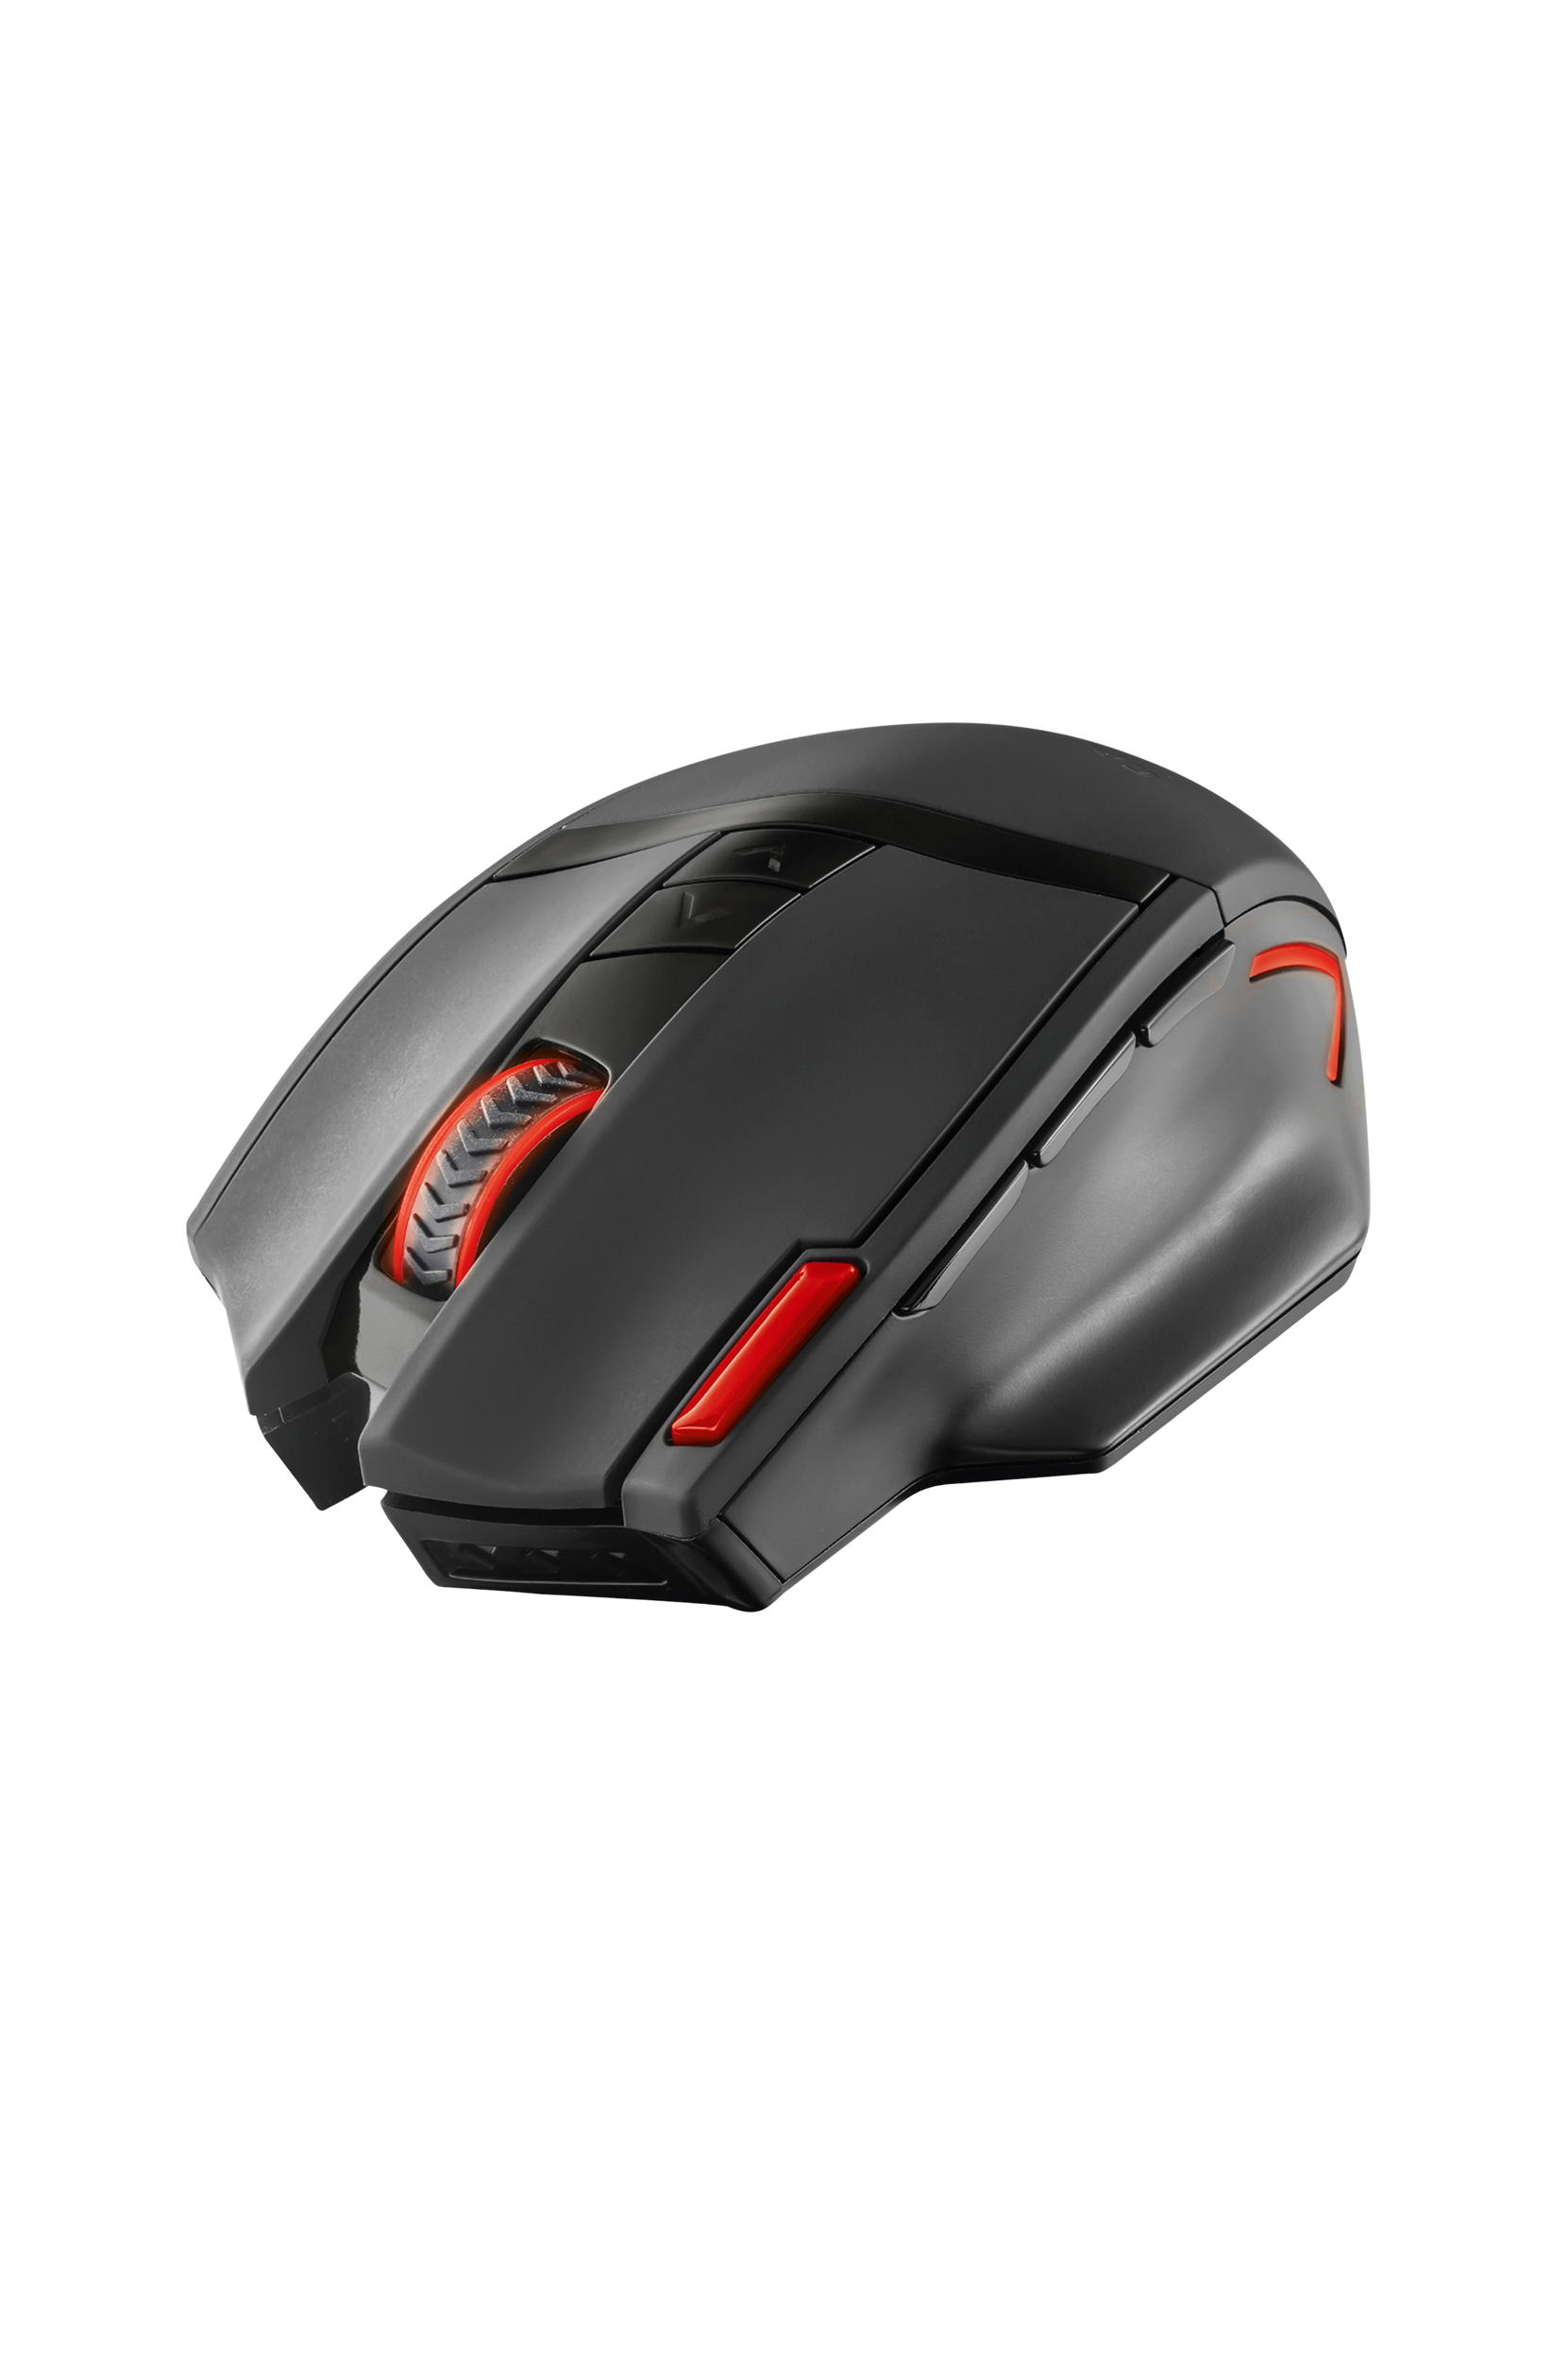 GXT 130 Wireless Gaming Mouse, Trust